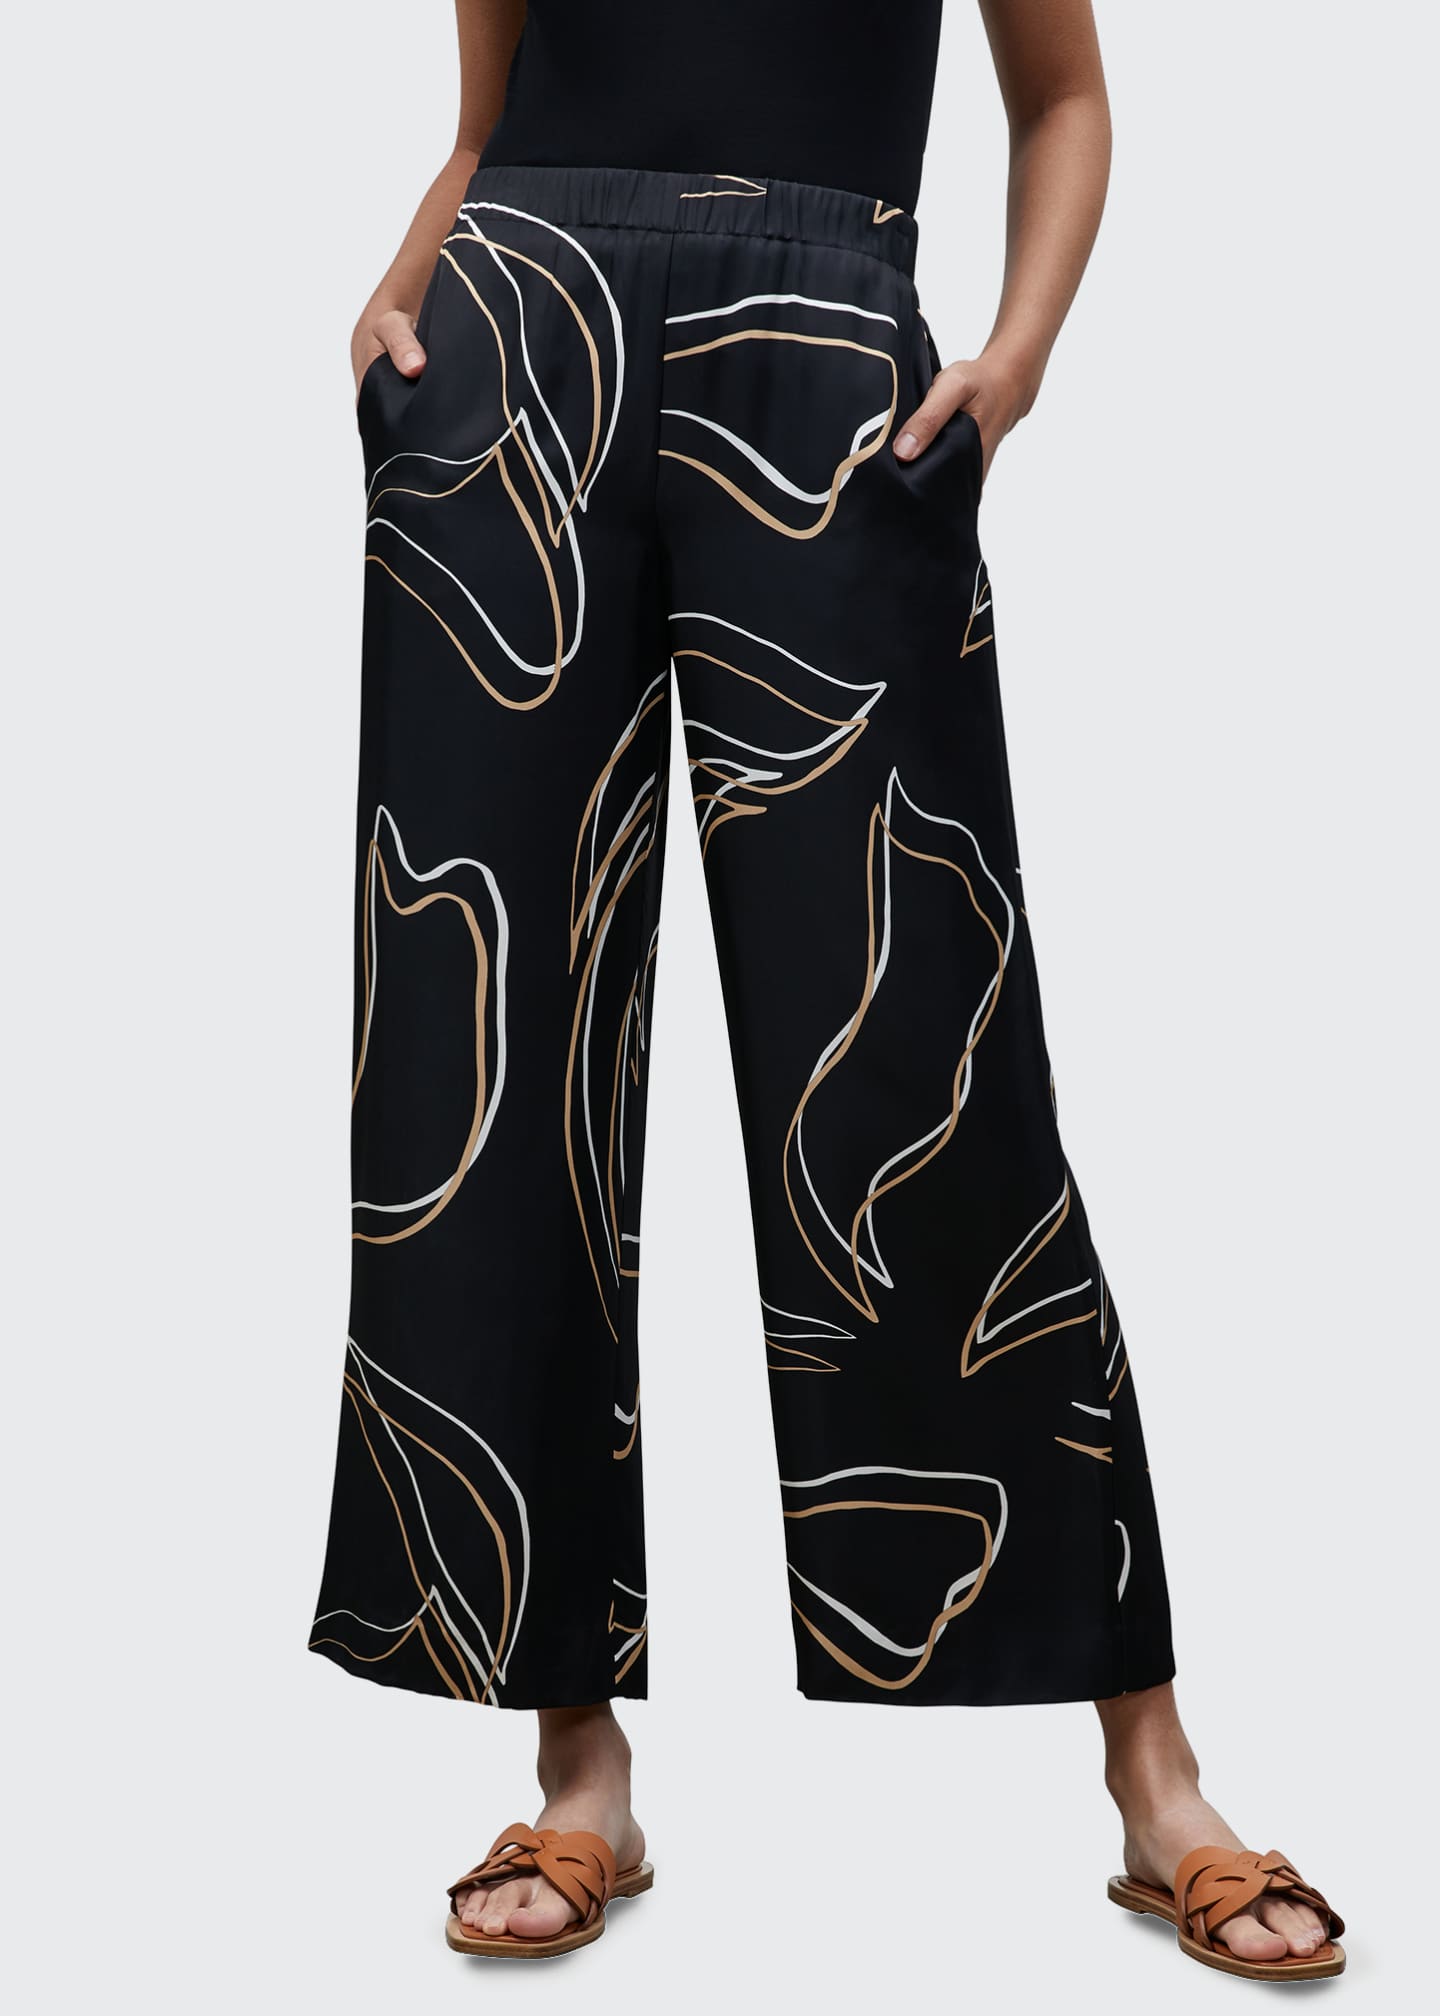 Lafayette 148 New York Riverside Printed Pull-On Ankle Pant - Bergdorf